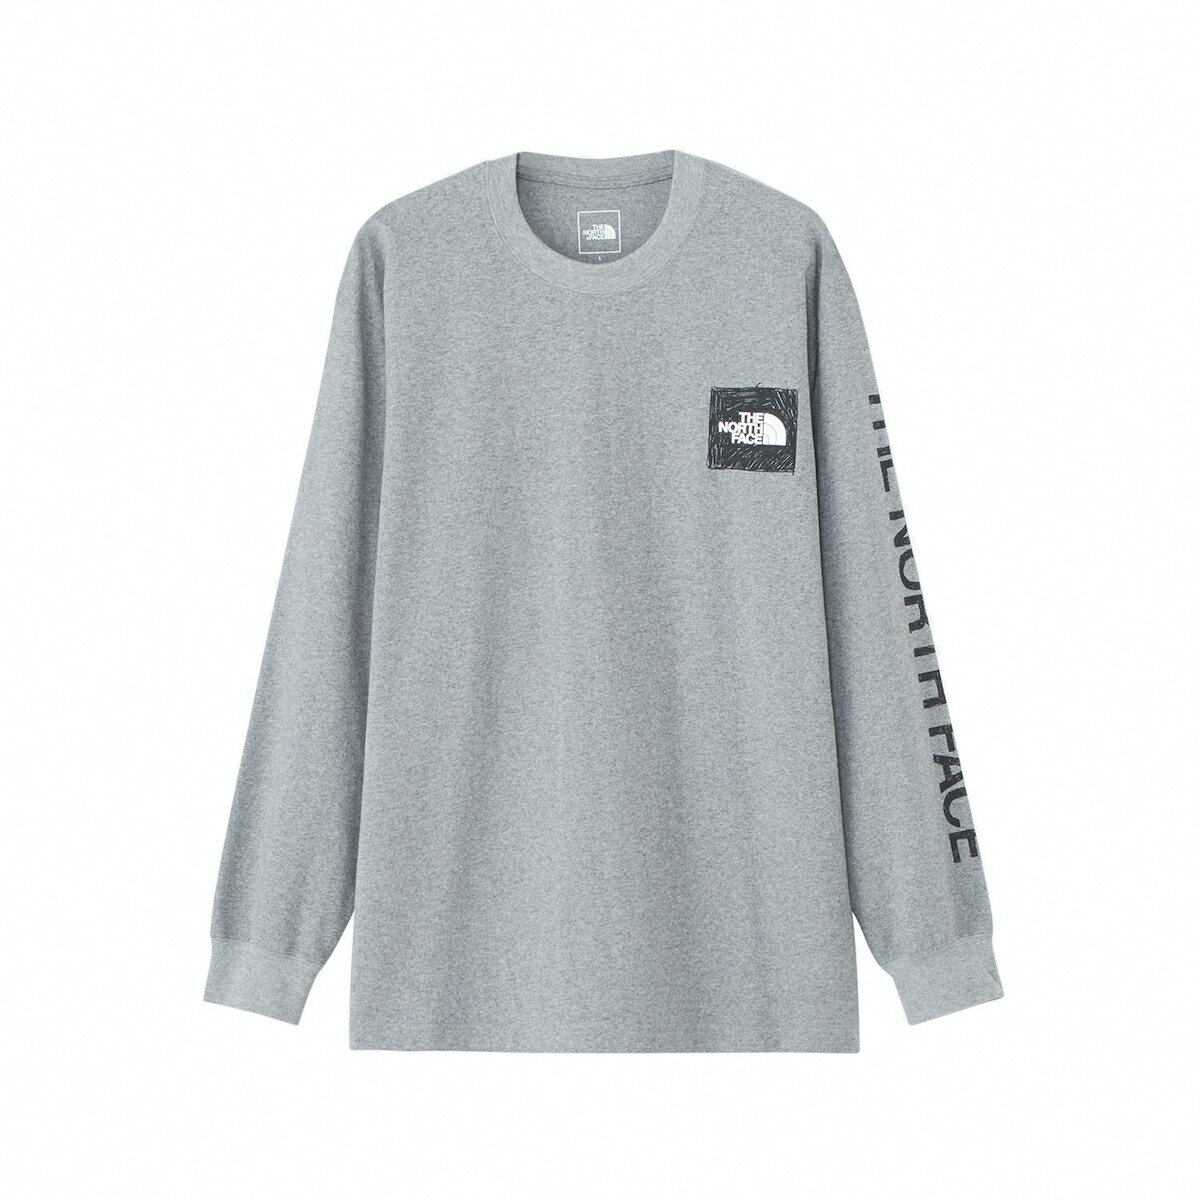 THE NORTH FACE L/S Sleeve Grap